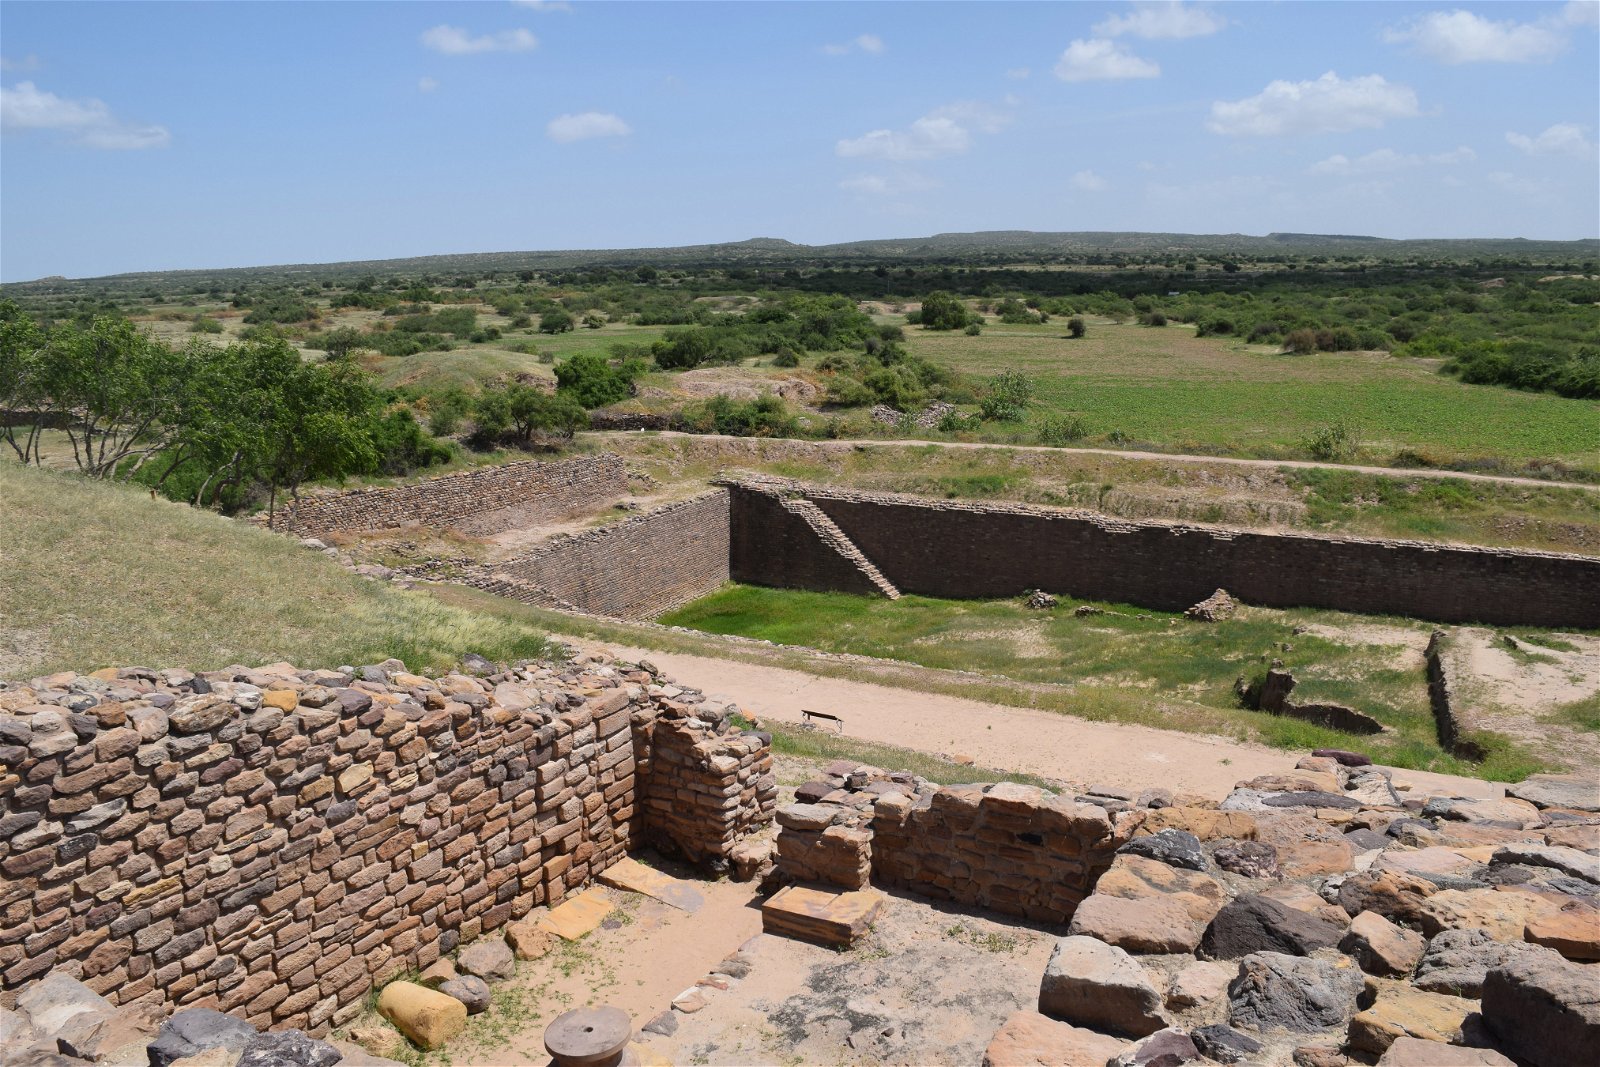 Present Day Excavation going on at Dholavira